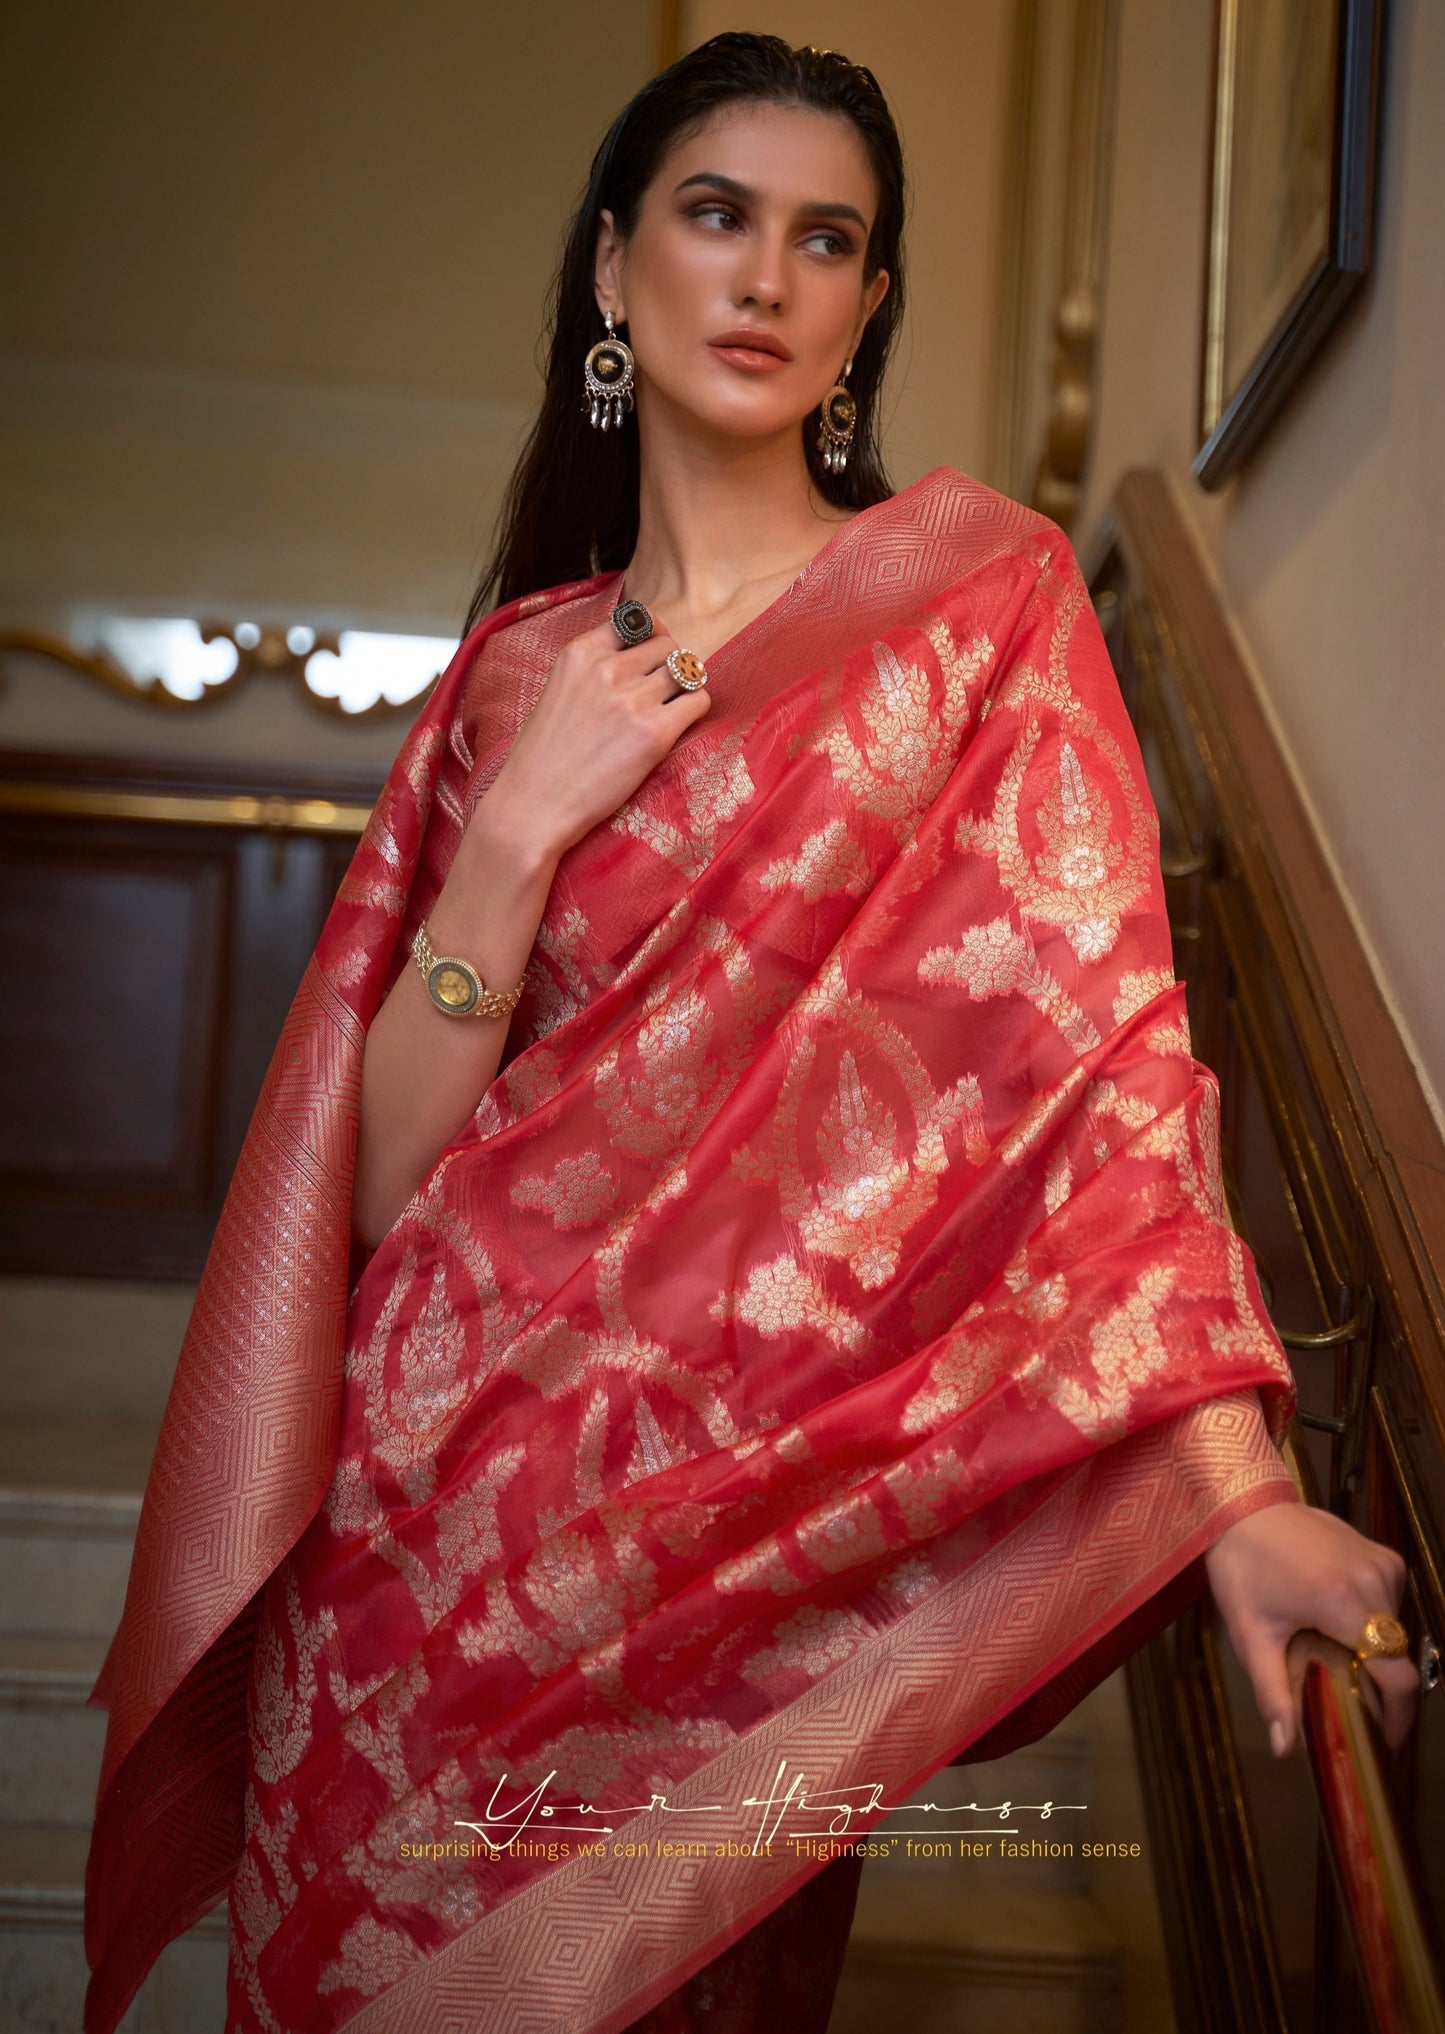 eoman in red colour banarasi saree looking in the left side